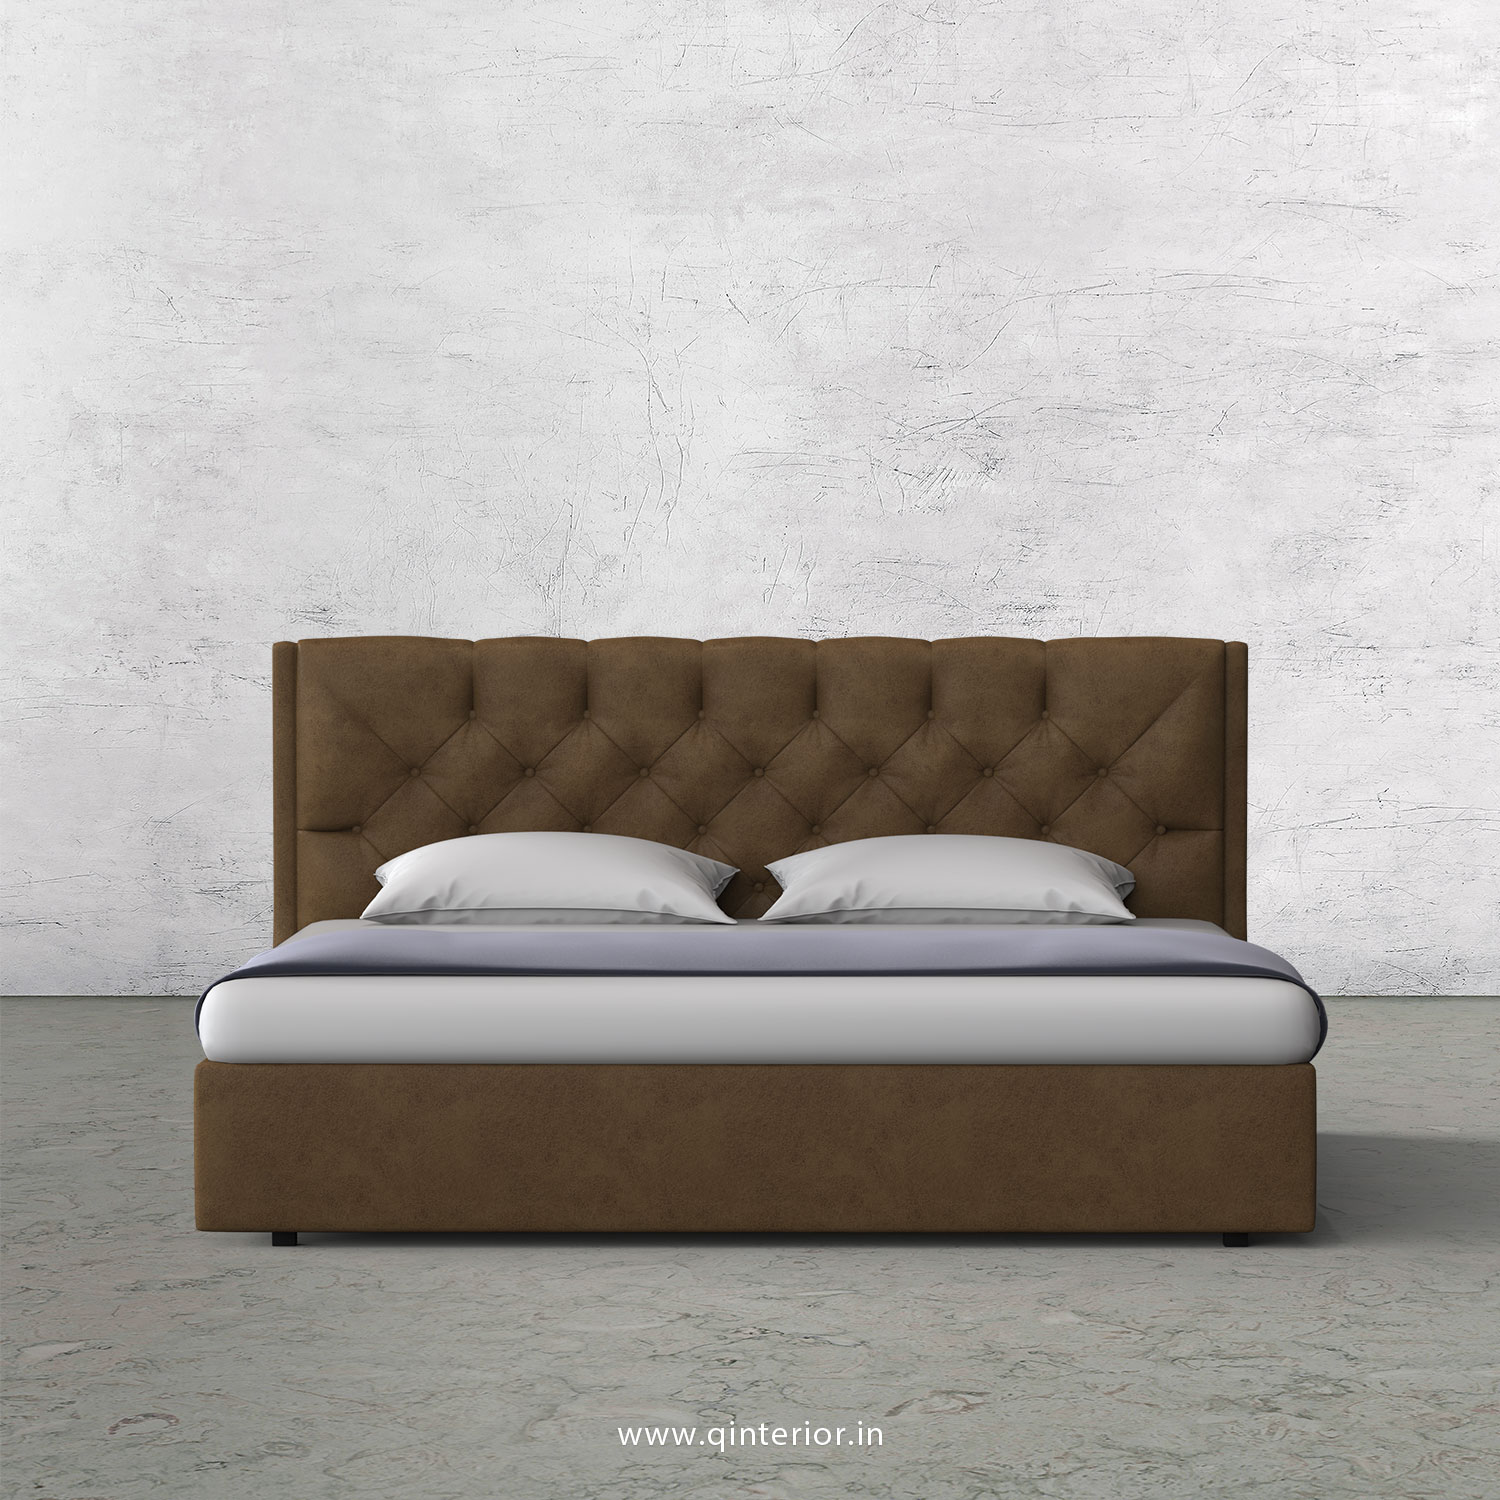 Scorpius King Size Bed in Fab Leather Fabric - KBD009 FL02